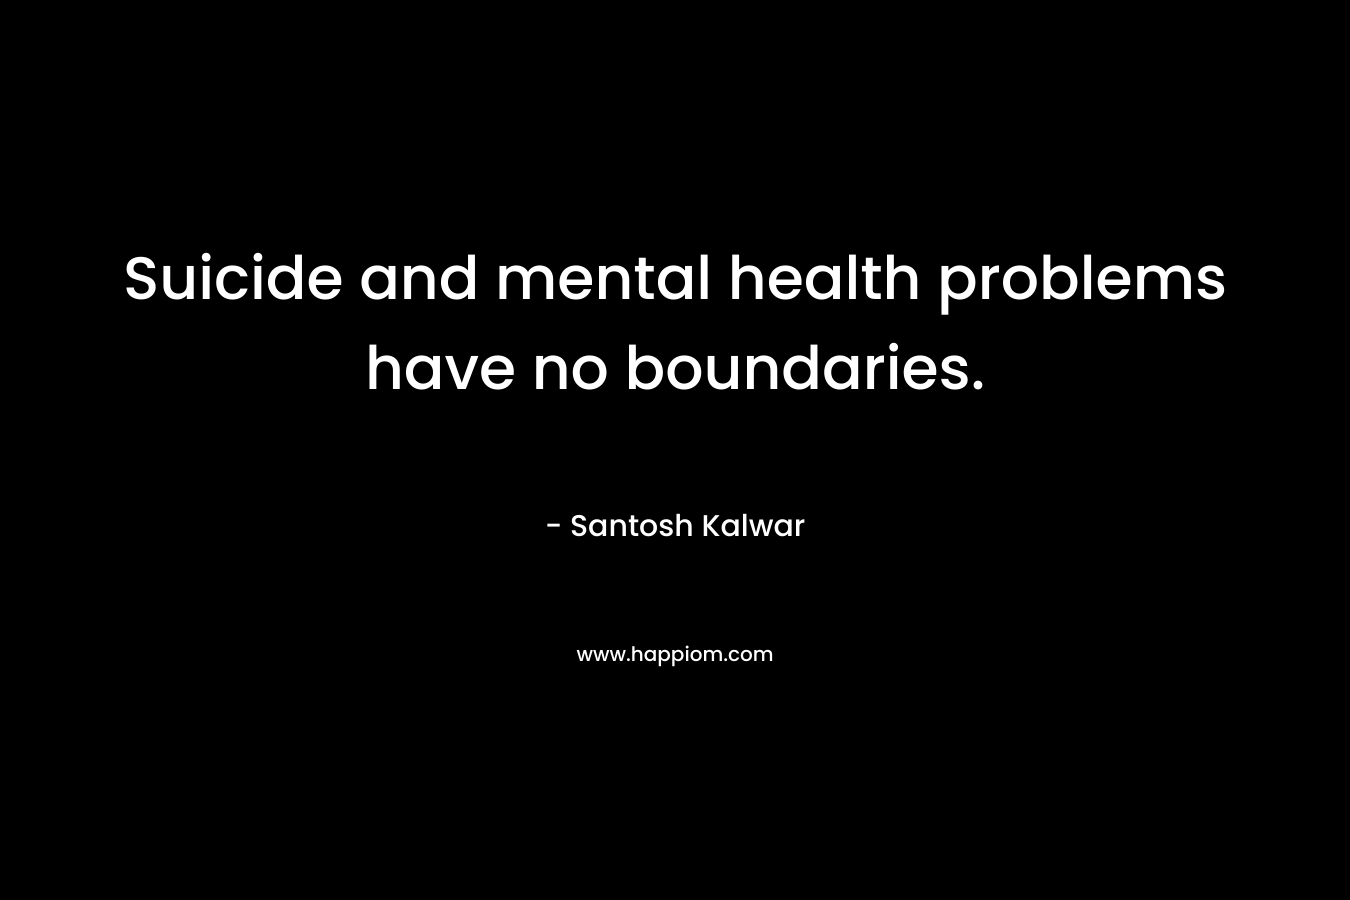 Suicide and mental health problems have no boundaries.